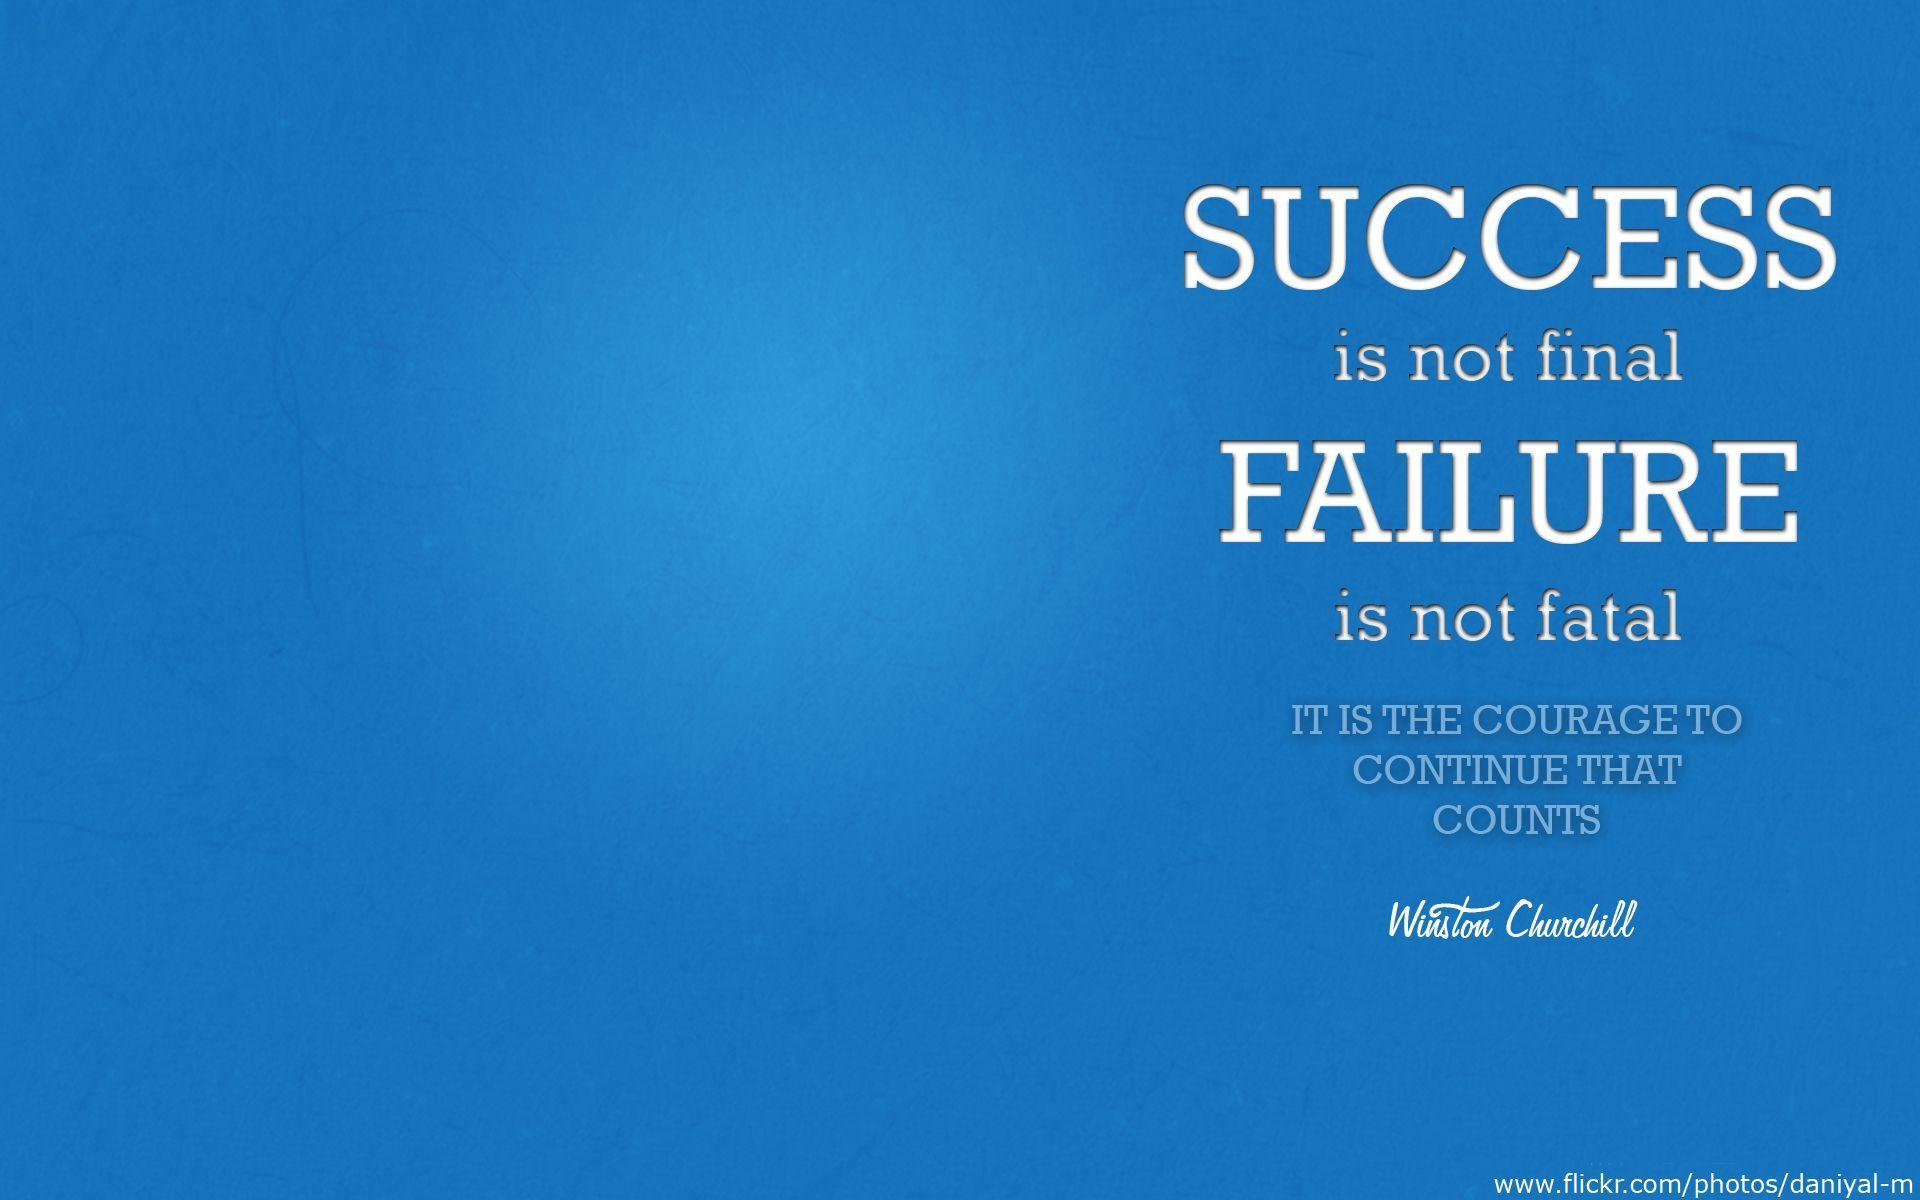 Success is not final. Failure is not fatal. It is the courage to